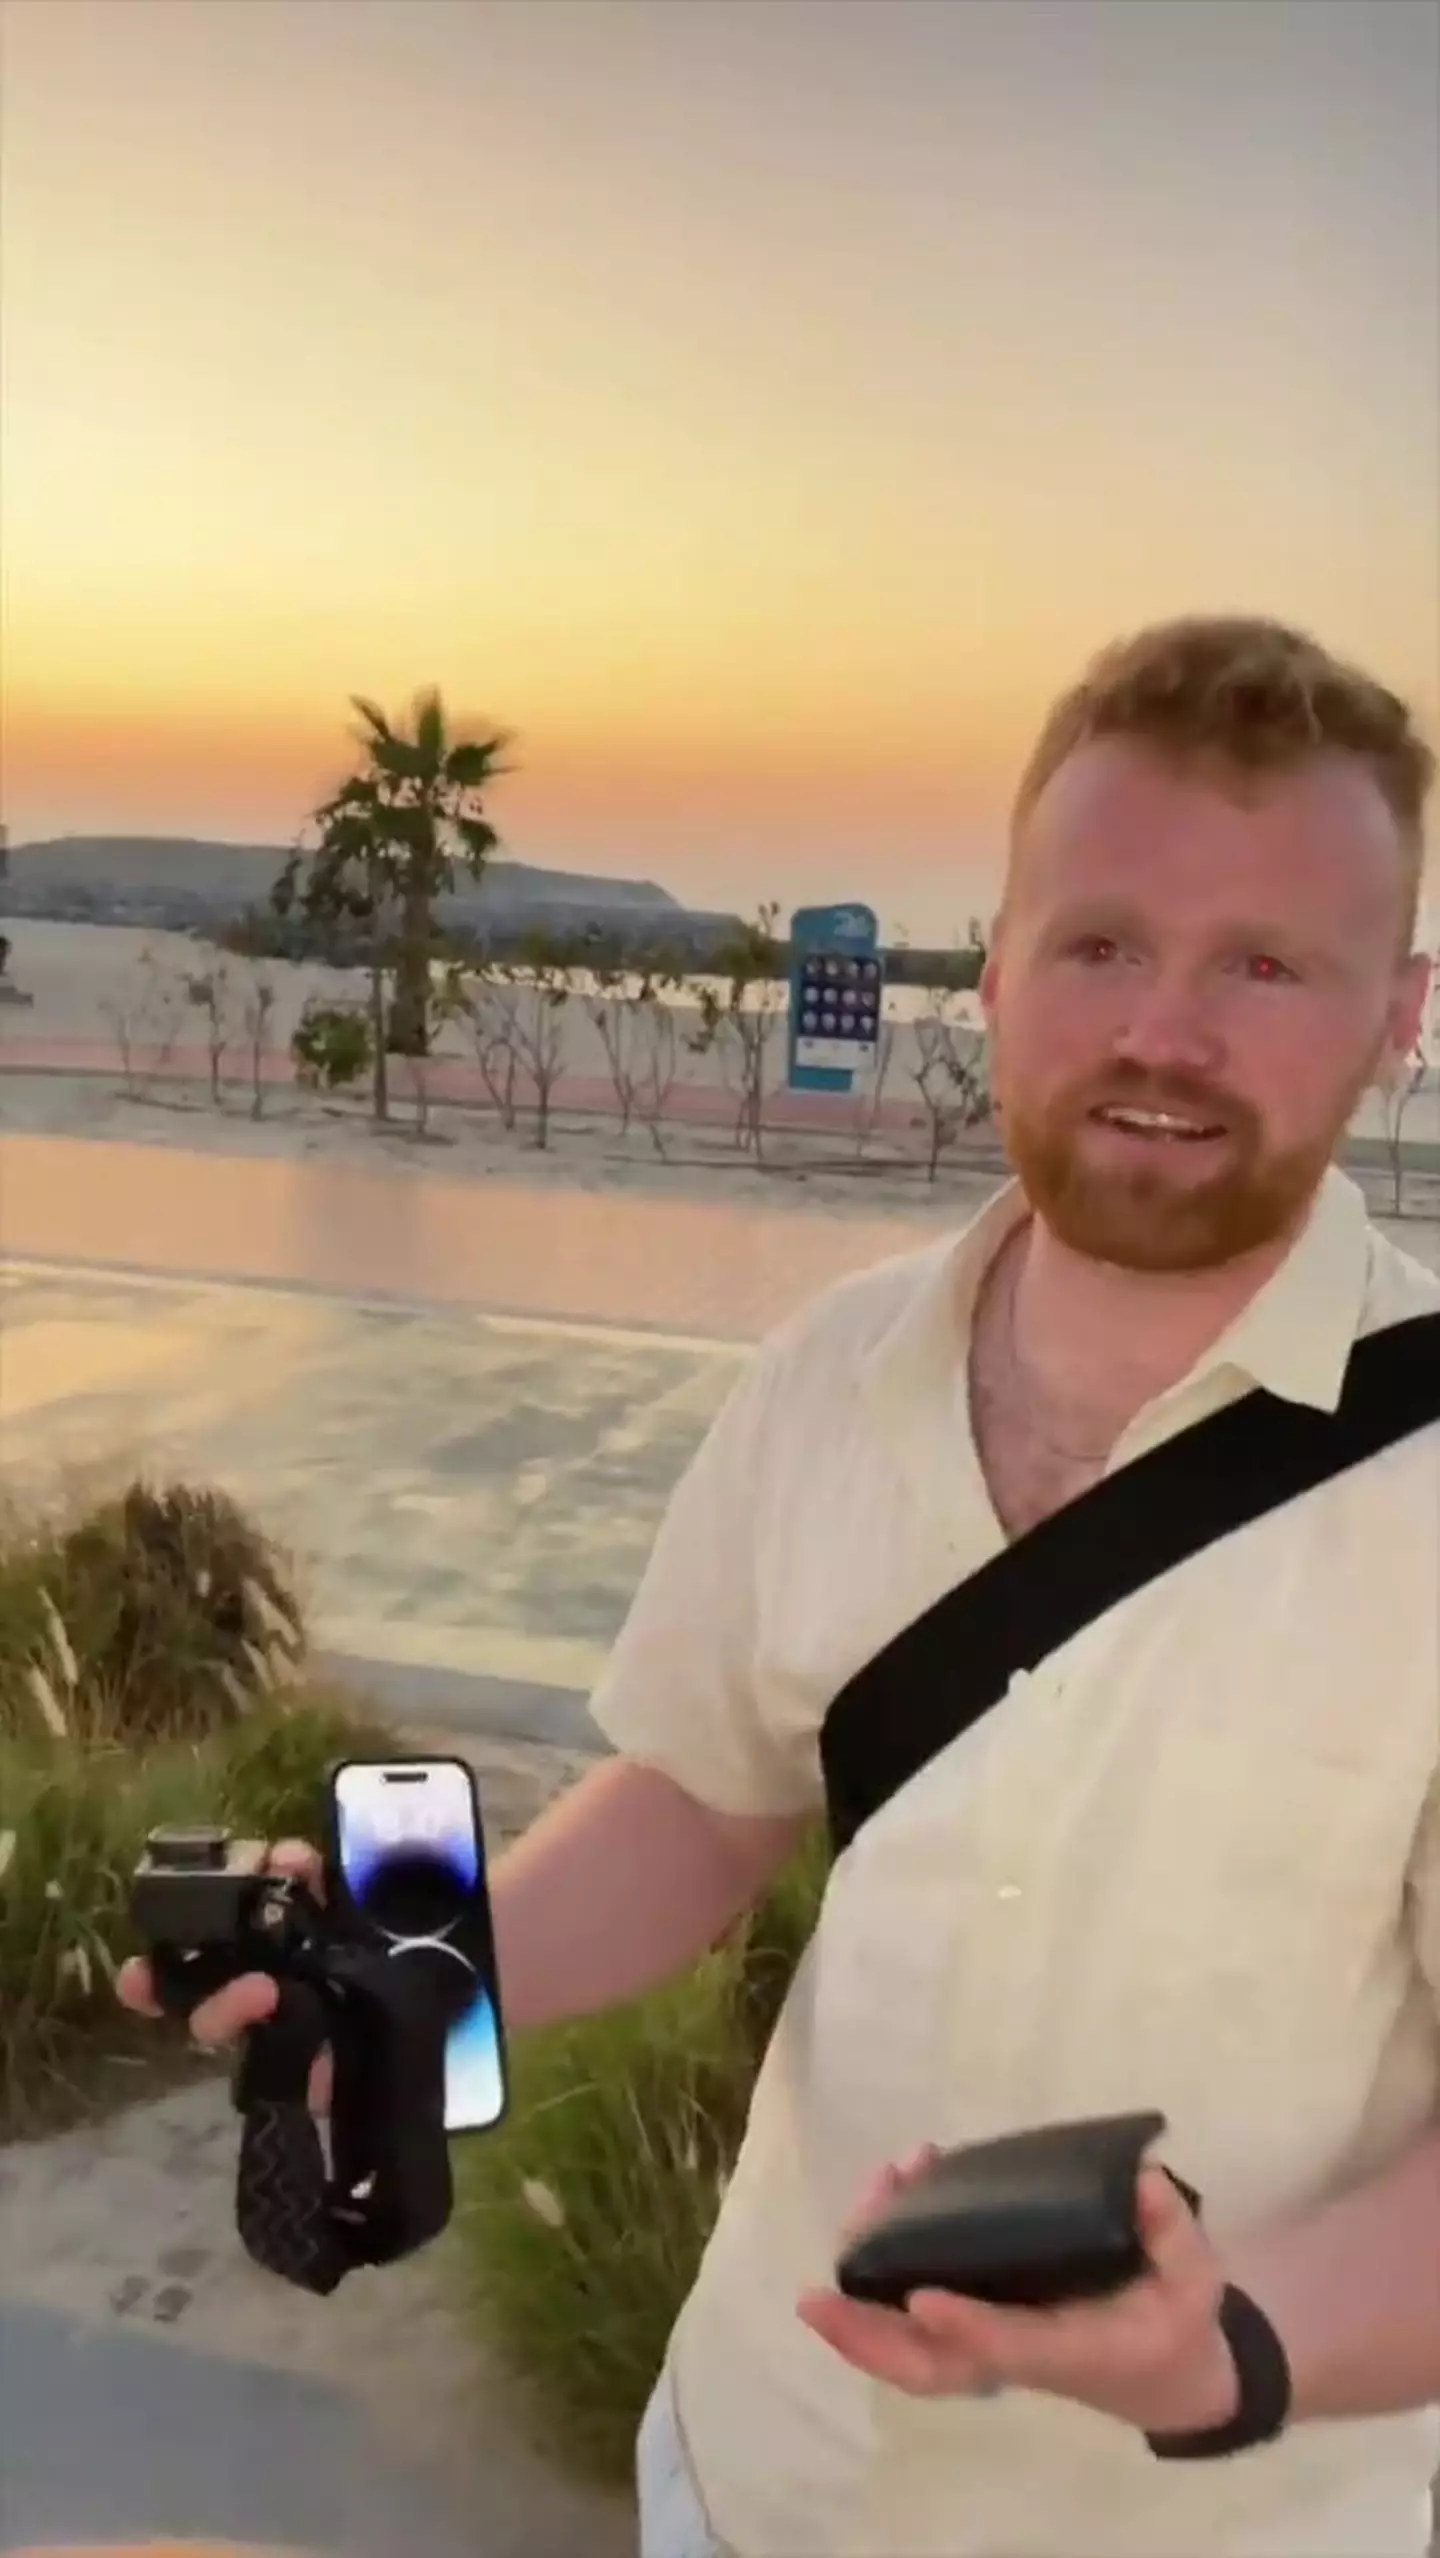 Lad has moved to Dubai after his wallet and phone test proved the city's safety.